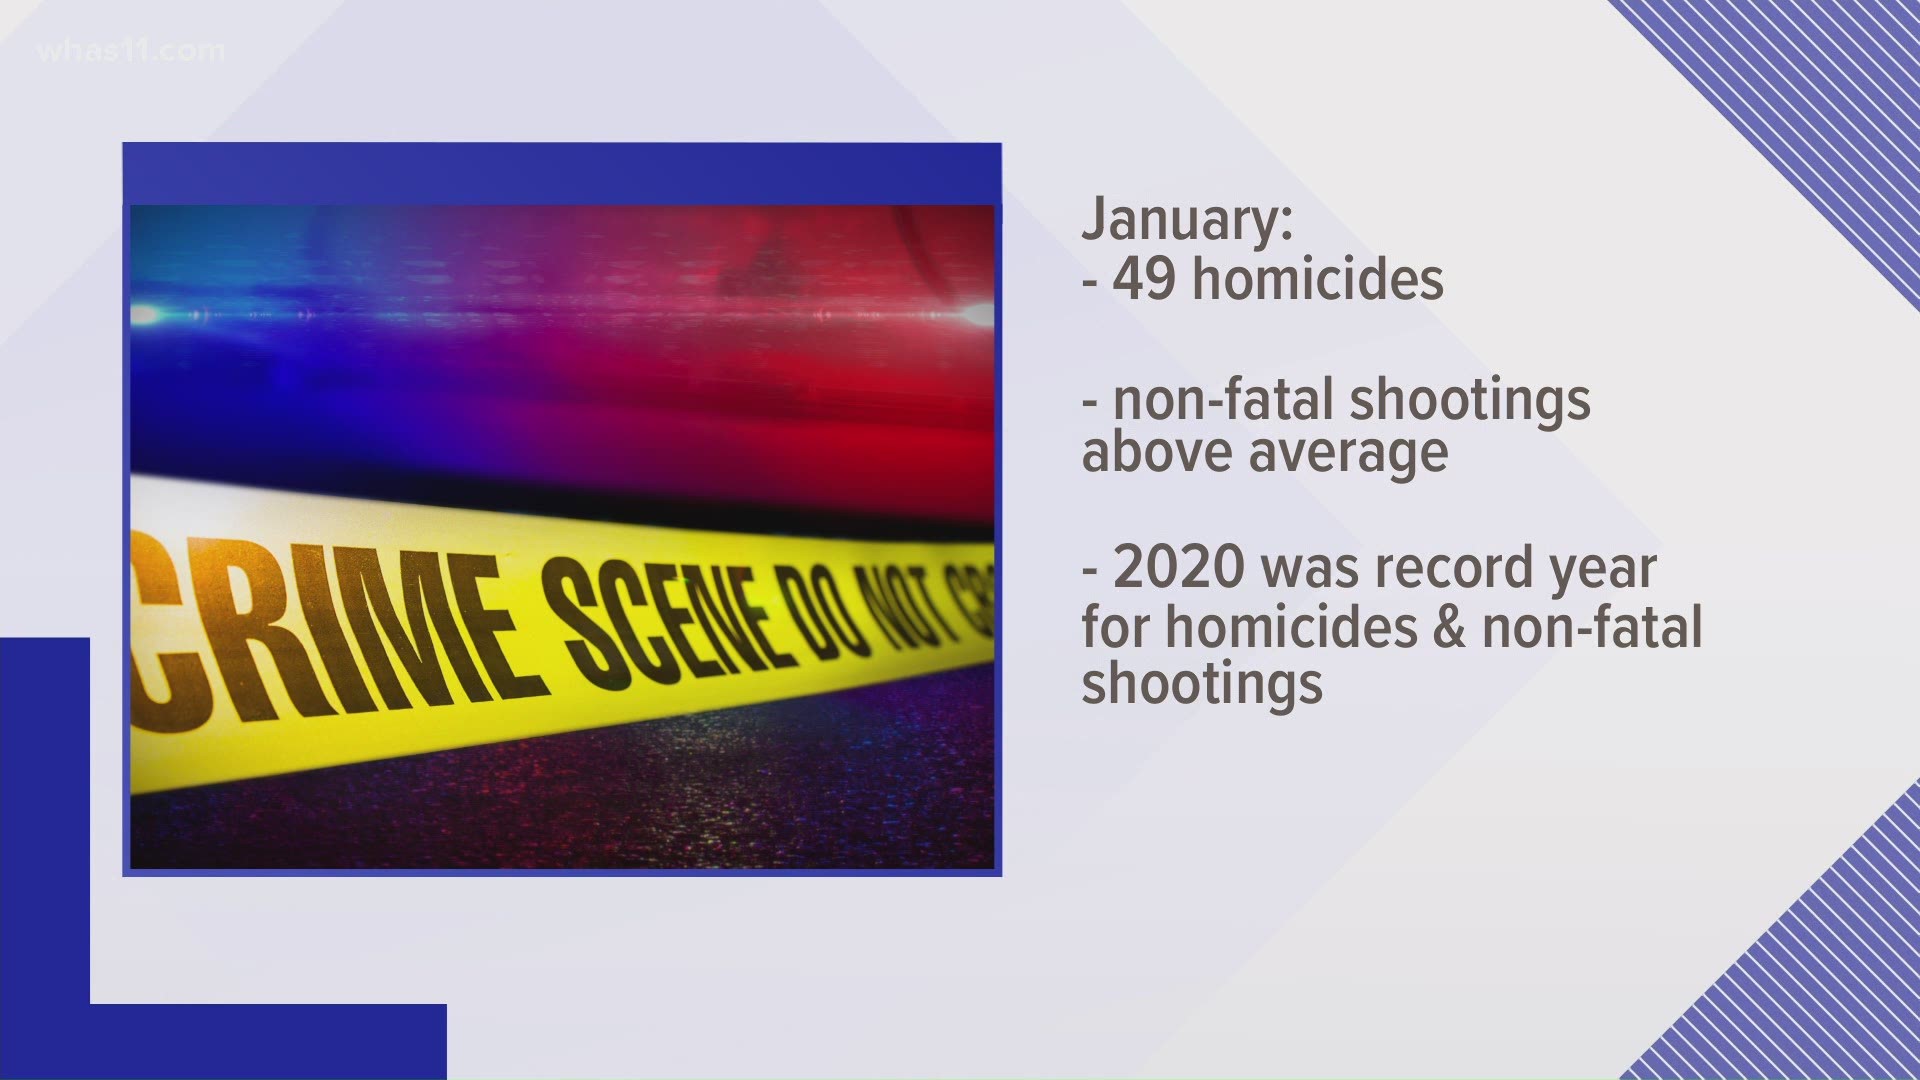 Louisville sees deadliest January on record with 15 homicides